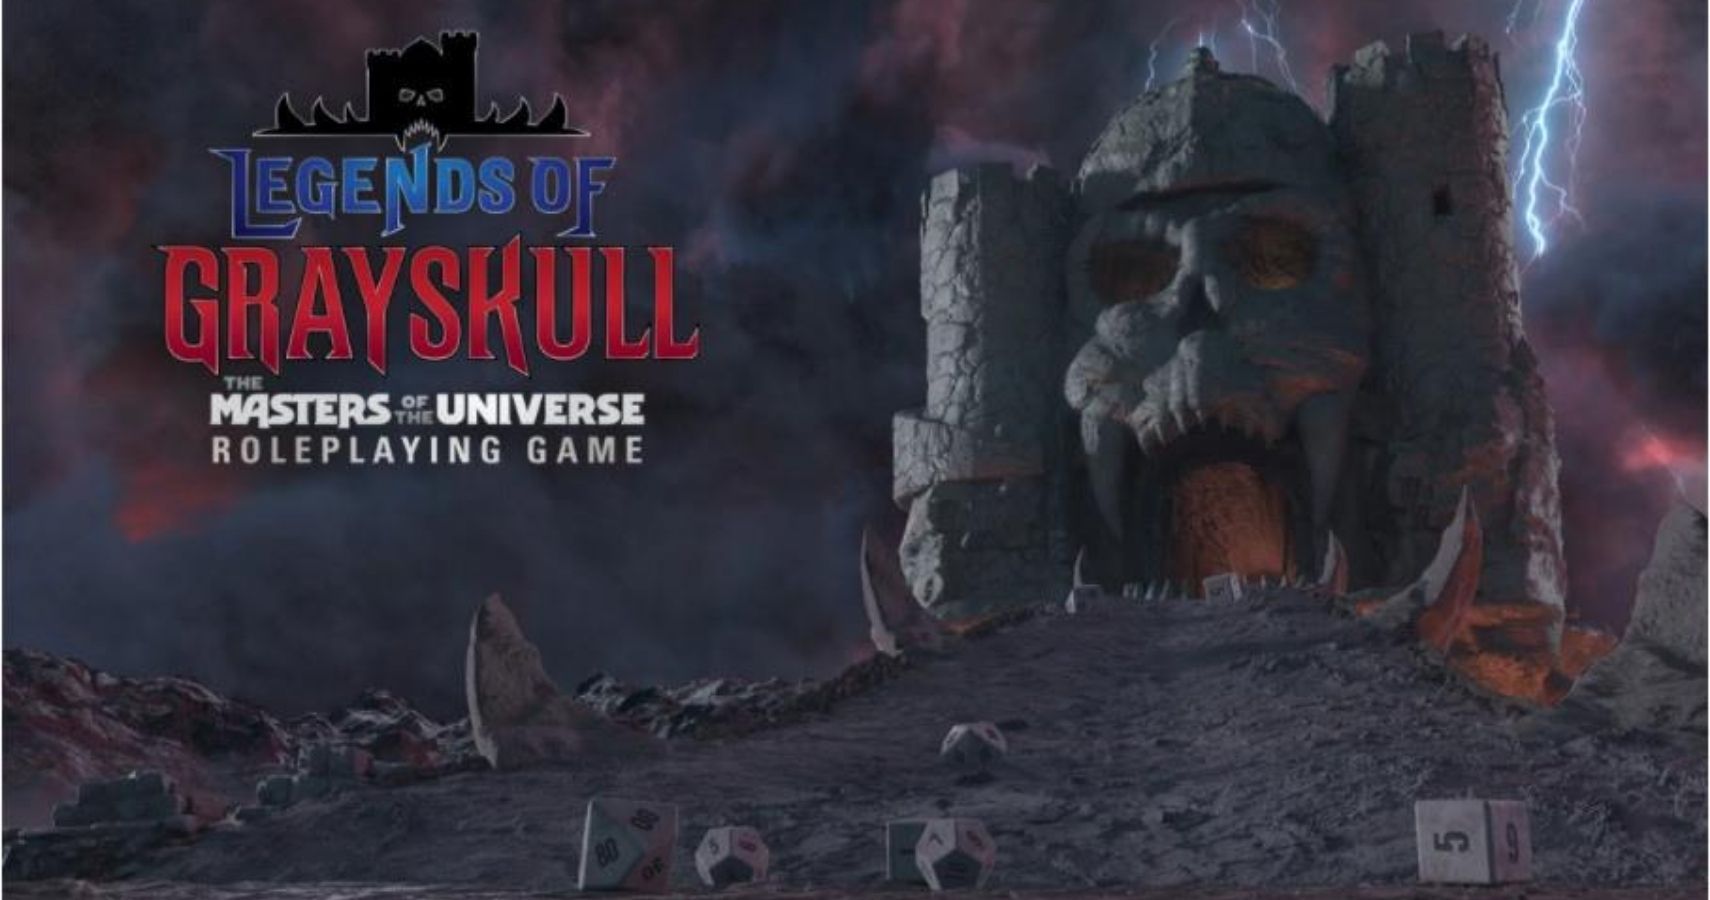 Legends of Grayskull Masters of the Universe Roleplaying Game feature image